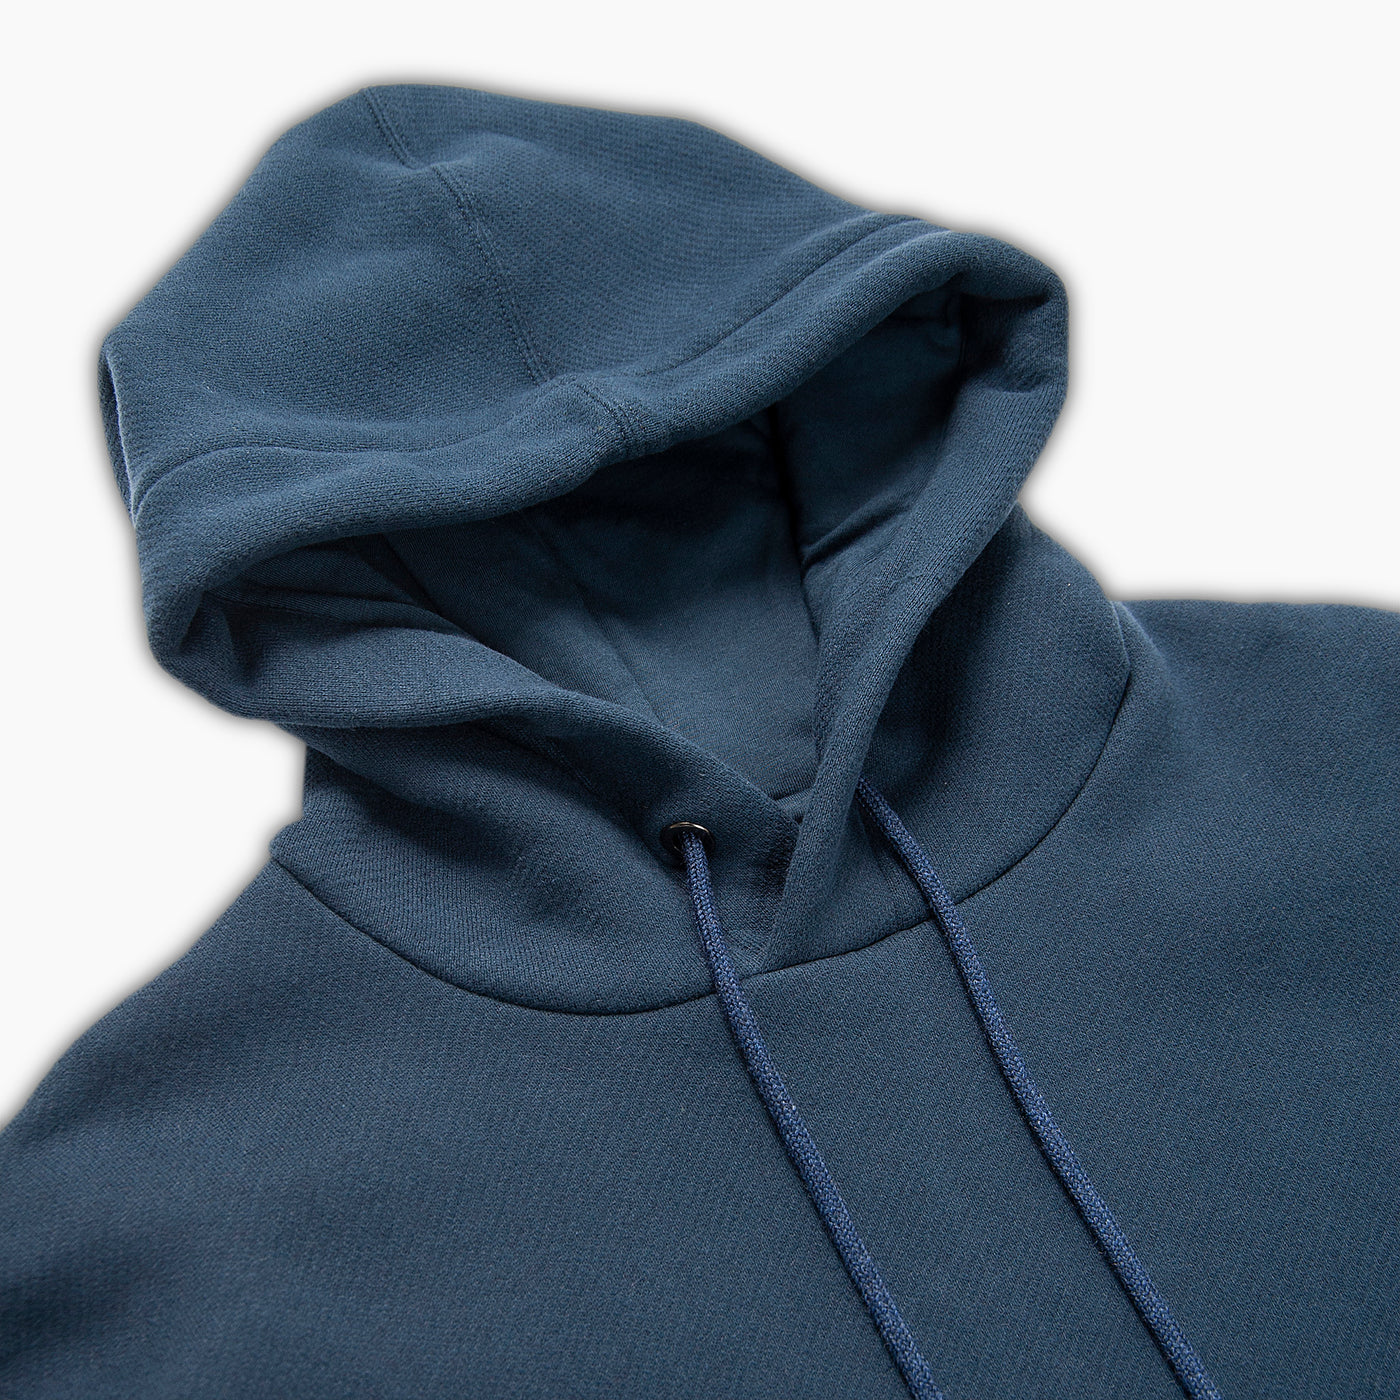 Kyle long-sleeved cotton-cashmere fleece hoodie